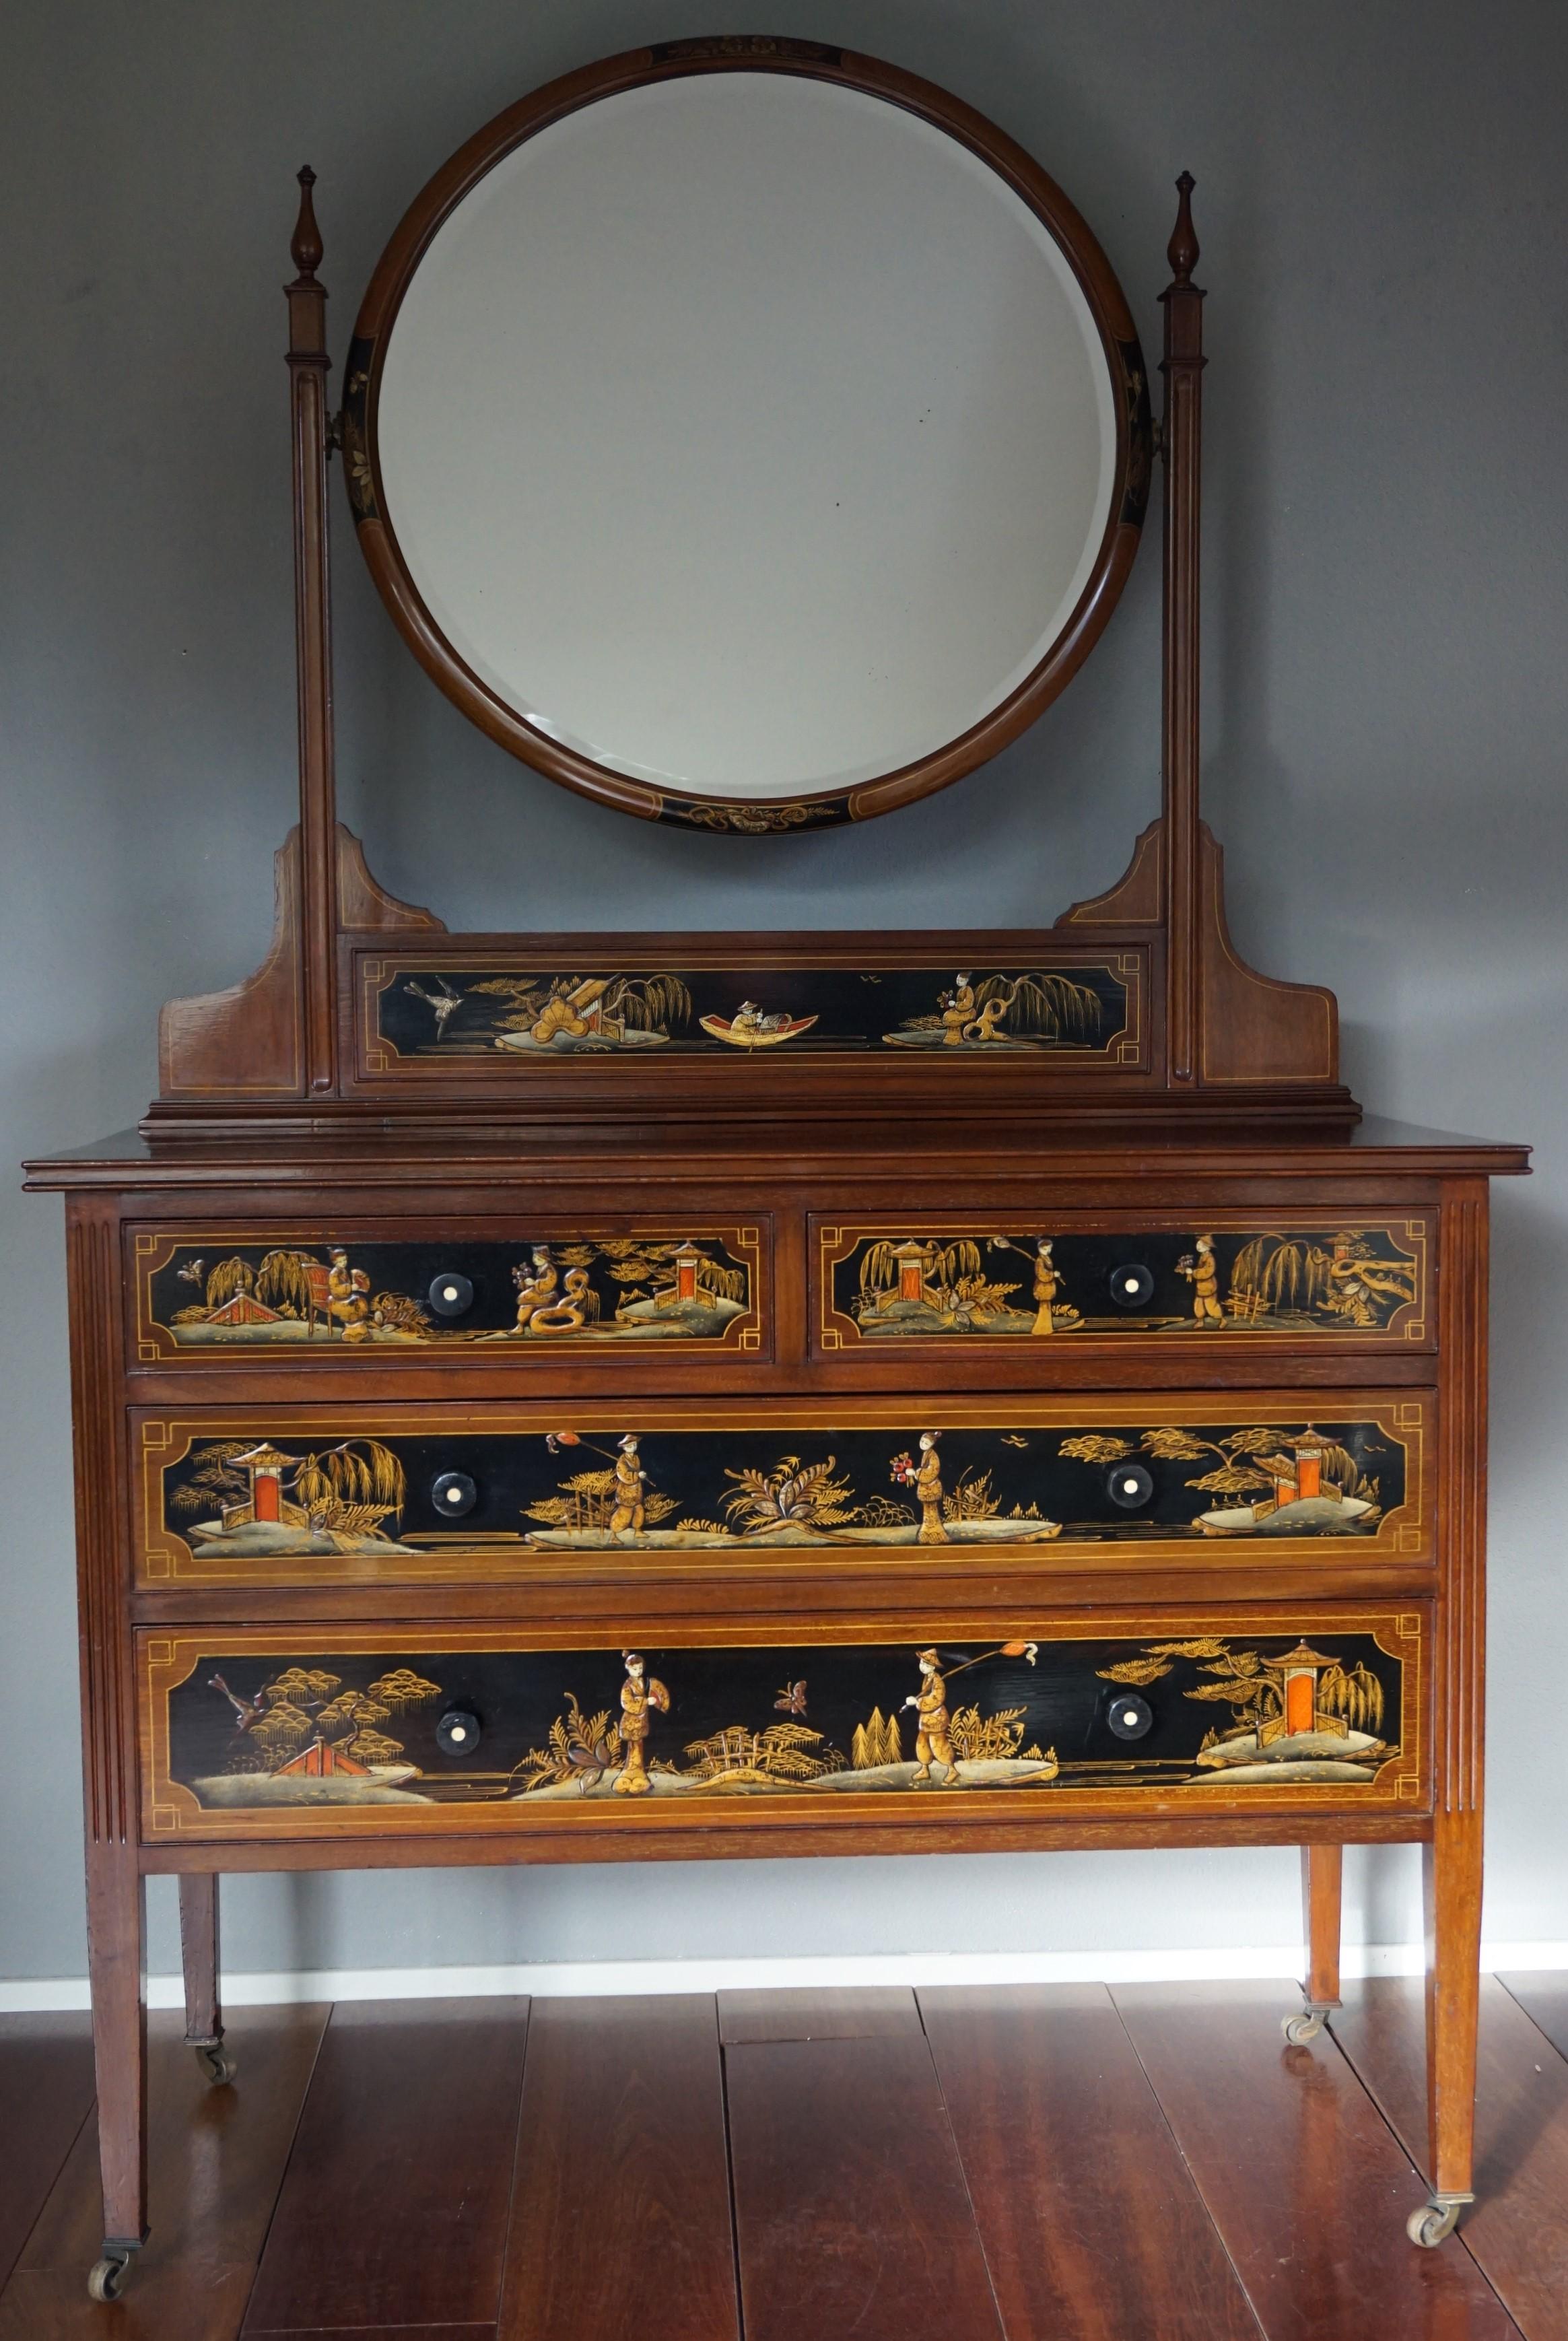 Stunning, practical and all hand-crafted chest of drawers with circular mirror.

This museum quality and condition piece of furniture and work of art at the same time, dates back to the era of the British Aesthetic Movement. It is part of a unique